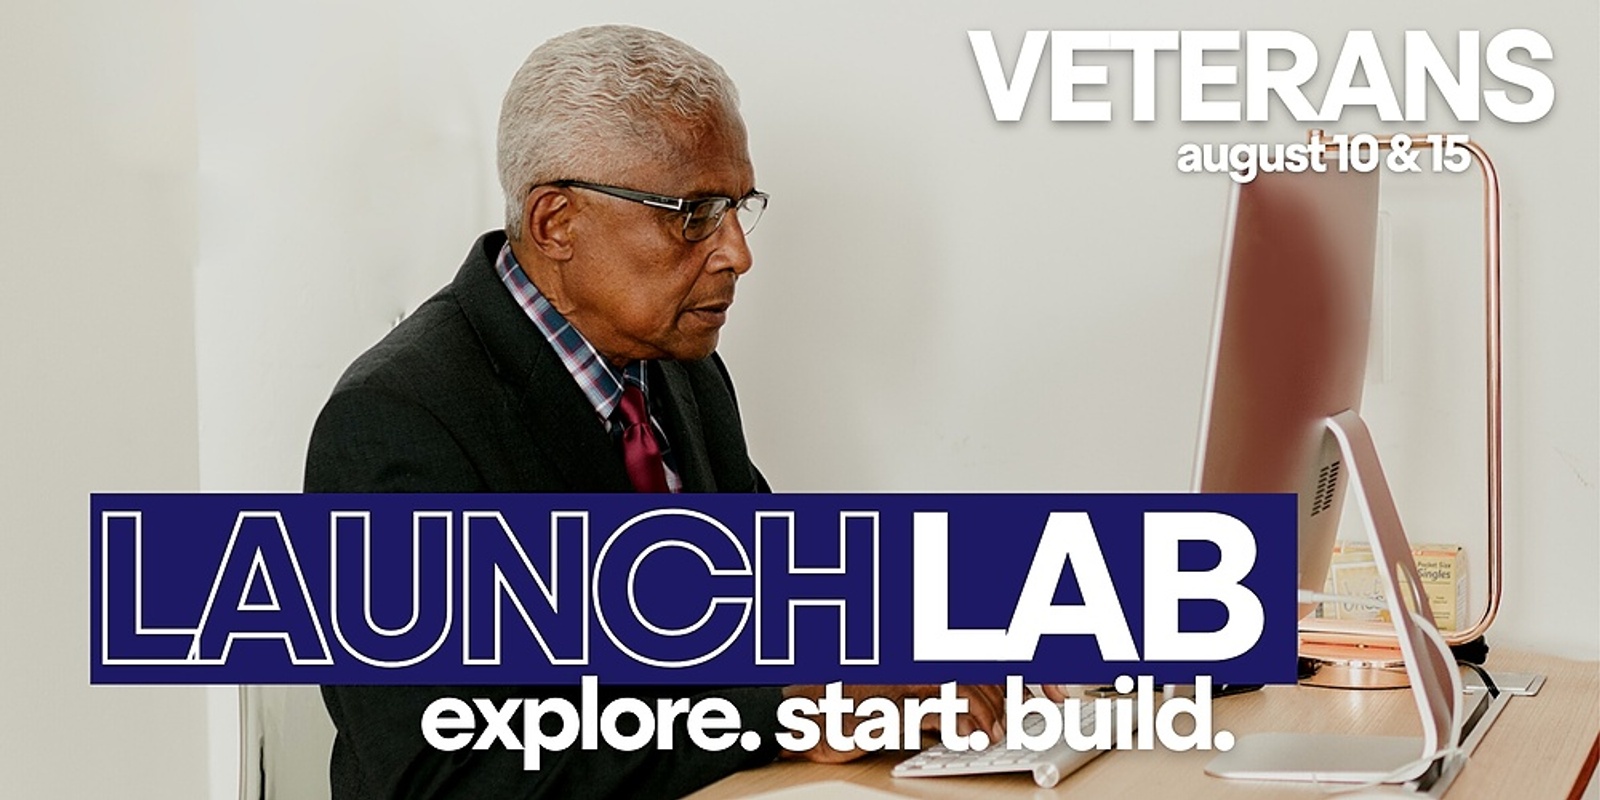 LAUNCH LAB FOR VETERANS // August